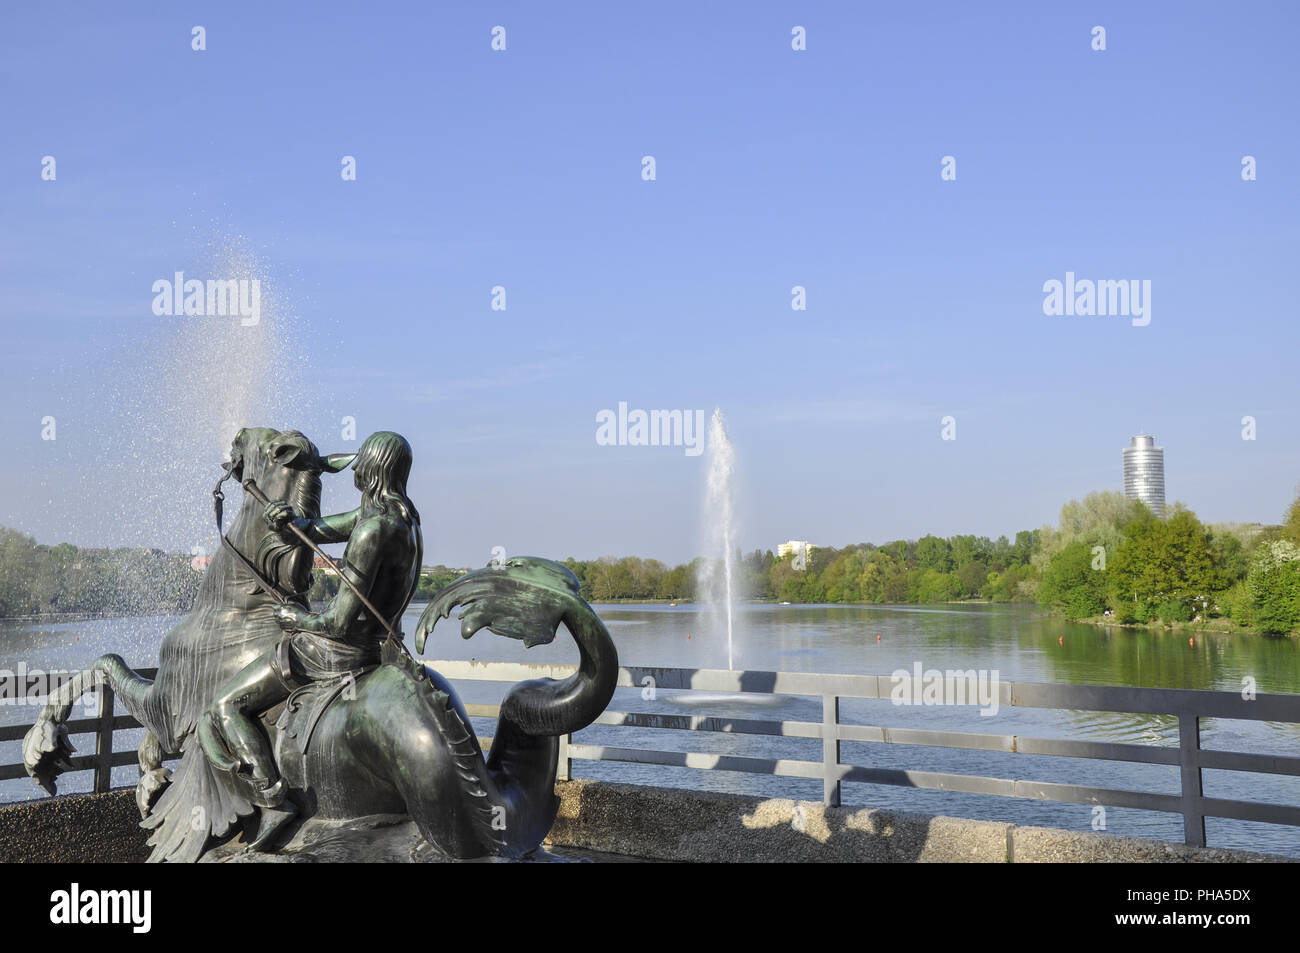 Water well with horseman sculpture in Nuremberg, Germany Stock Photo